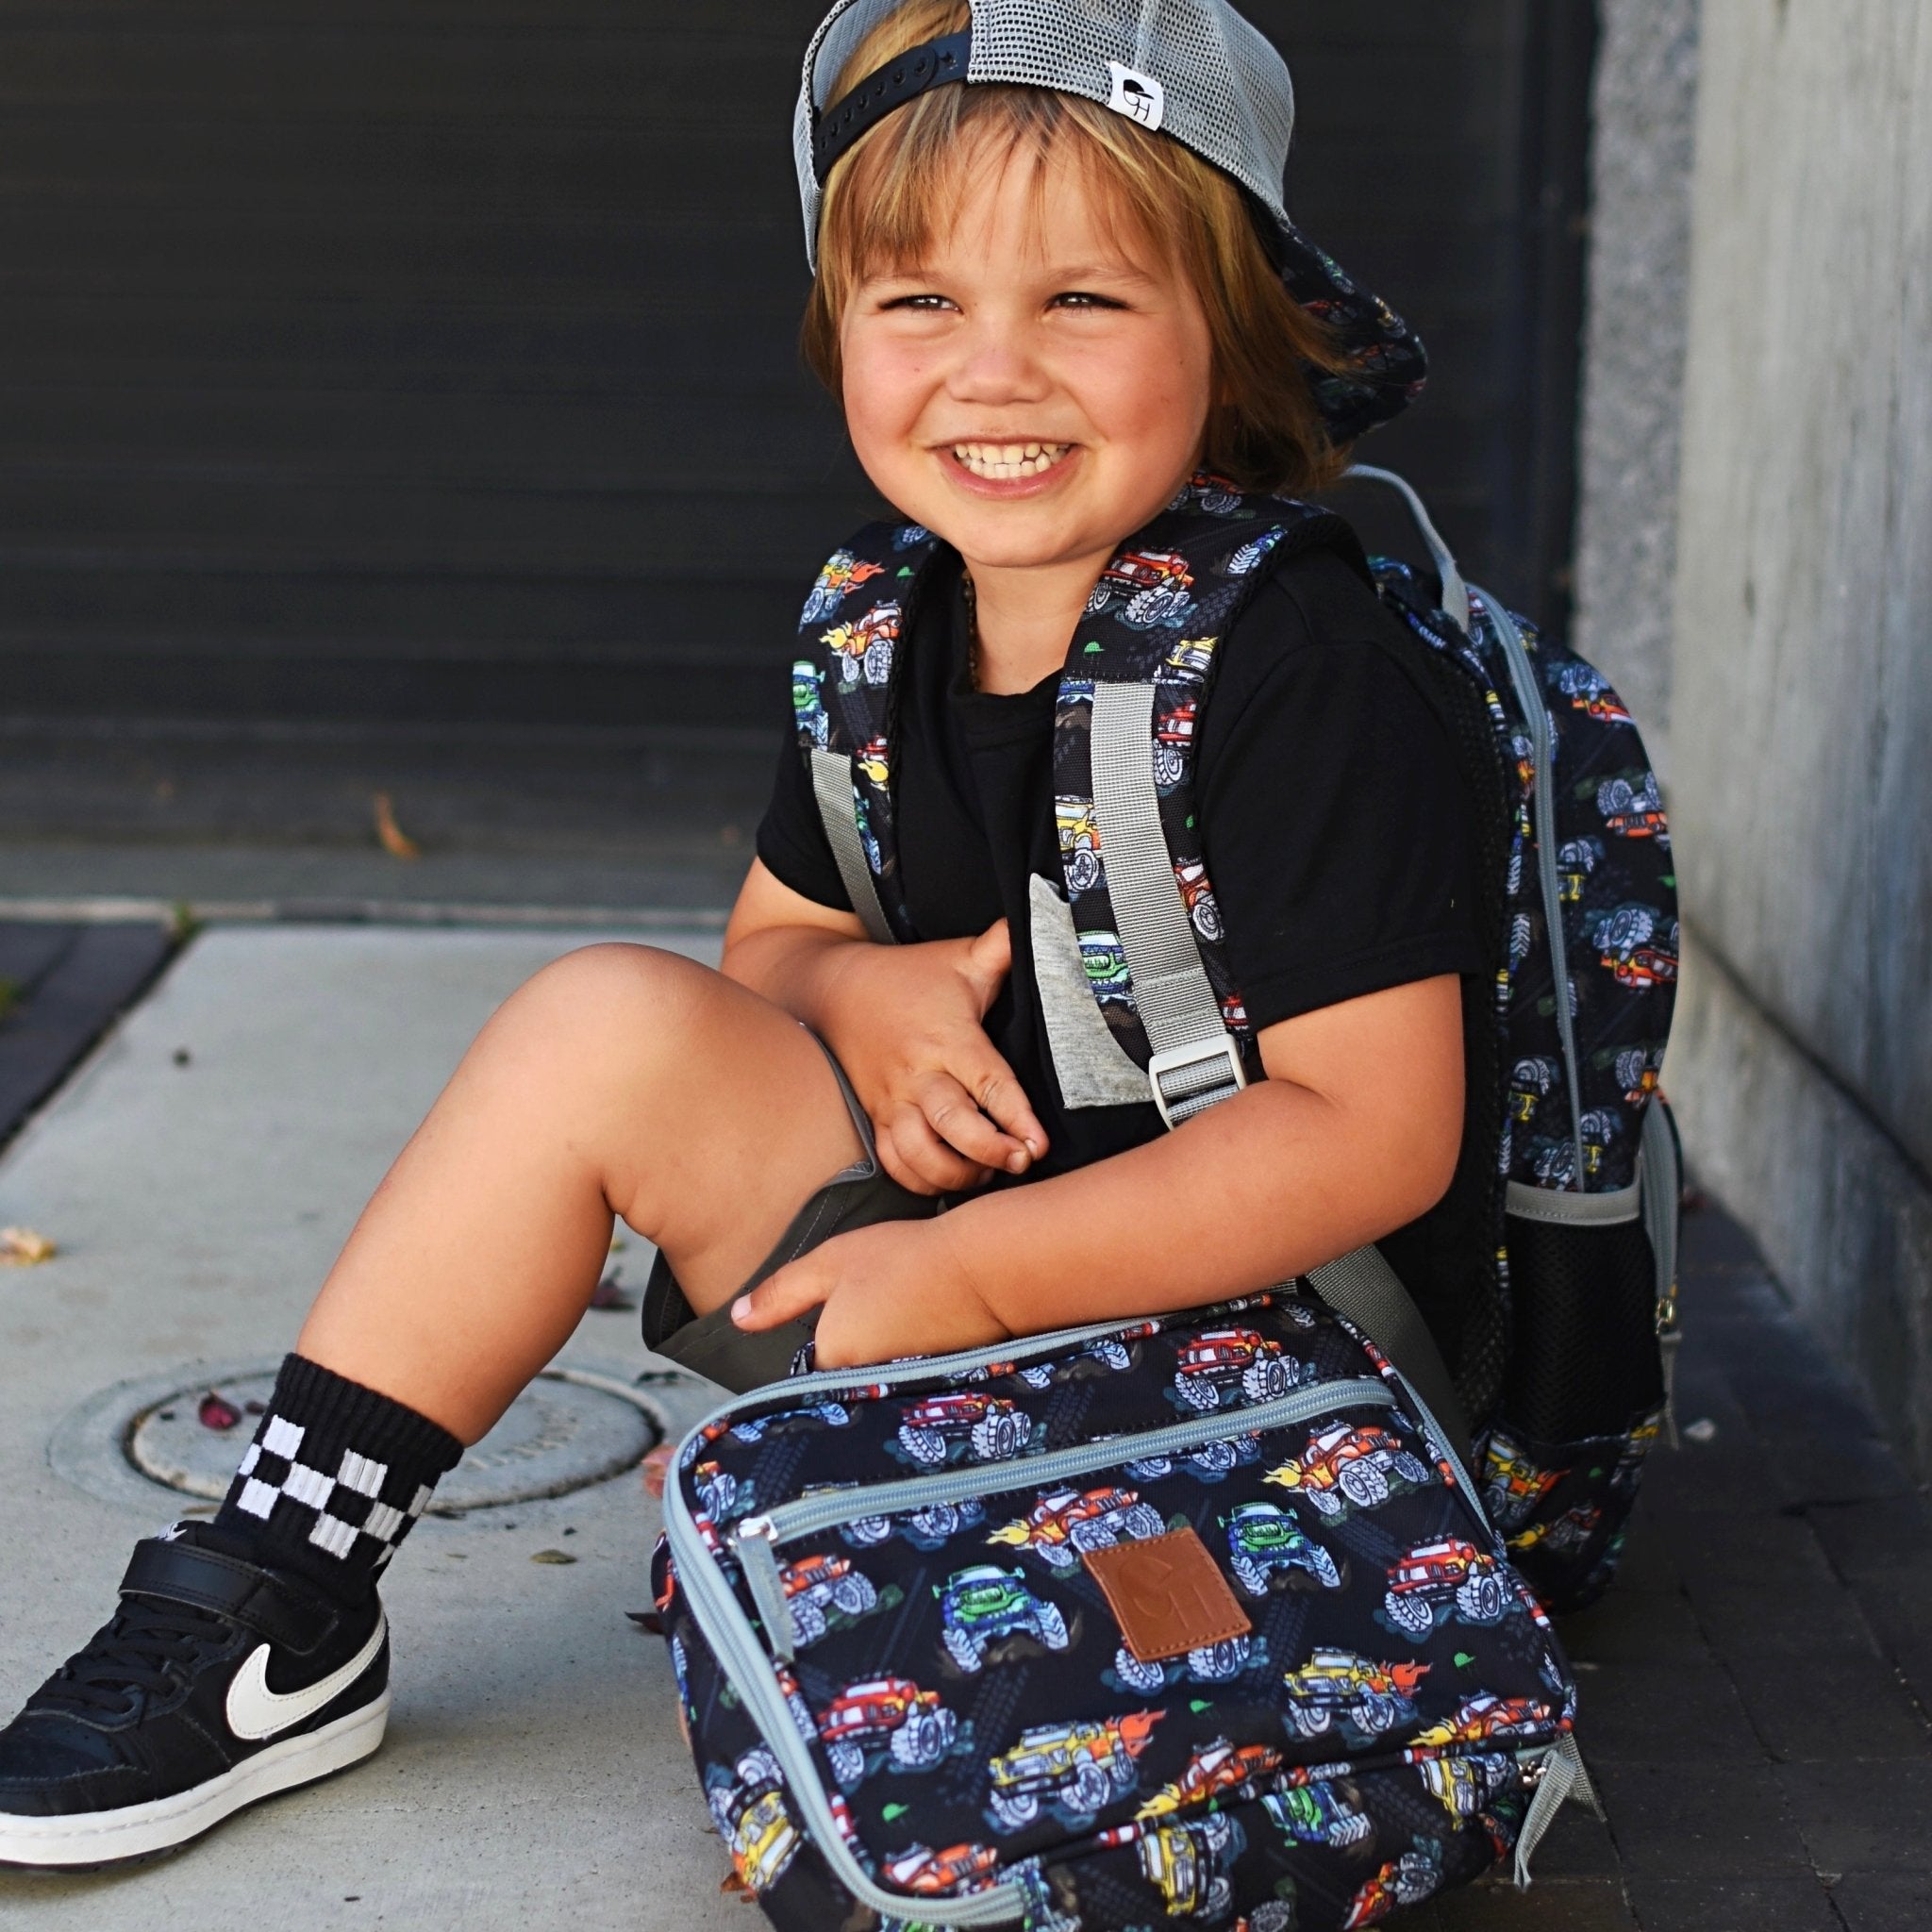 Monster Truck Backpack - George Hats